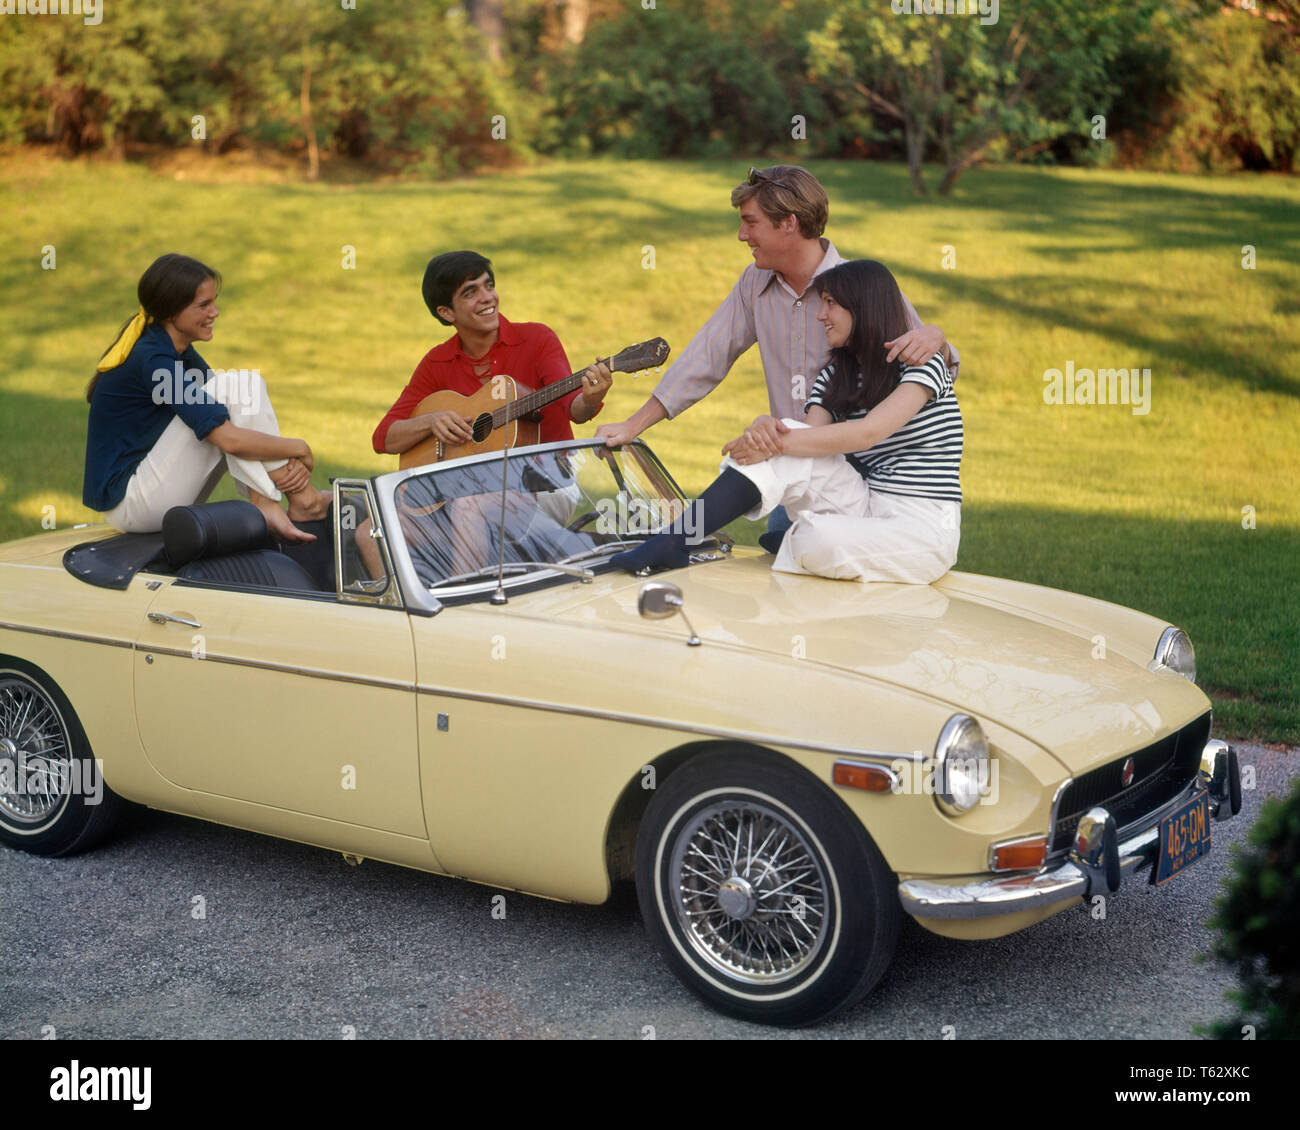 1970s TWO TEENAGE COUPLES SITTING ON CREAM COLOR MG CONVERTIBLE SPORTS CAR SUMMERTIME FUN DATING MUSIC BOY PLAYING GUITAR - km2869 PHT001 HARS VEHICLE TEAMWORK STRONG JOY LIFESTYLE SOUND GROWNUP HOME LIFE COMMUNICATING TRANSPORT COPY SPACE FRIENDSHIP FULL-LENGTH HALF-LENGTH GROWN-UP AUTOMOBILE CARING TEENAGE GIRL TEENAGE BOY CONFIDENCE TRANSPORTATION SUMMERTIME HAPPINESS HIGH ANGLE SUMMER SEASON MOTOR VEHICLE RECREATION MG MOTORING CONNECTION CONCEPTUAL MOBILITY STYLISH TEENAGED PERSONAL ATTACHMENT AFFECTION COMMUNICATE EMOTION RELAXATION SEASON TOGETHERNESS CAUCASIAN ETHNICITY OLD FASHIONED Stock Photo